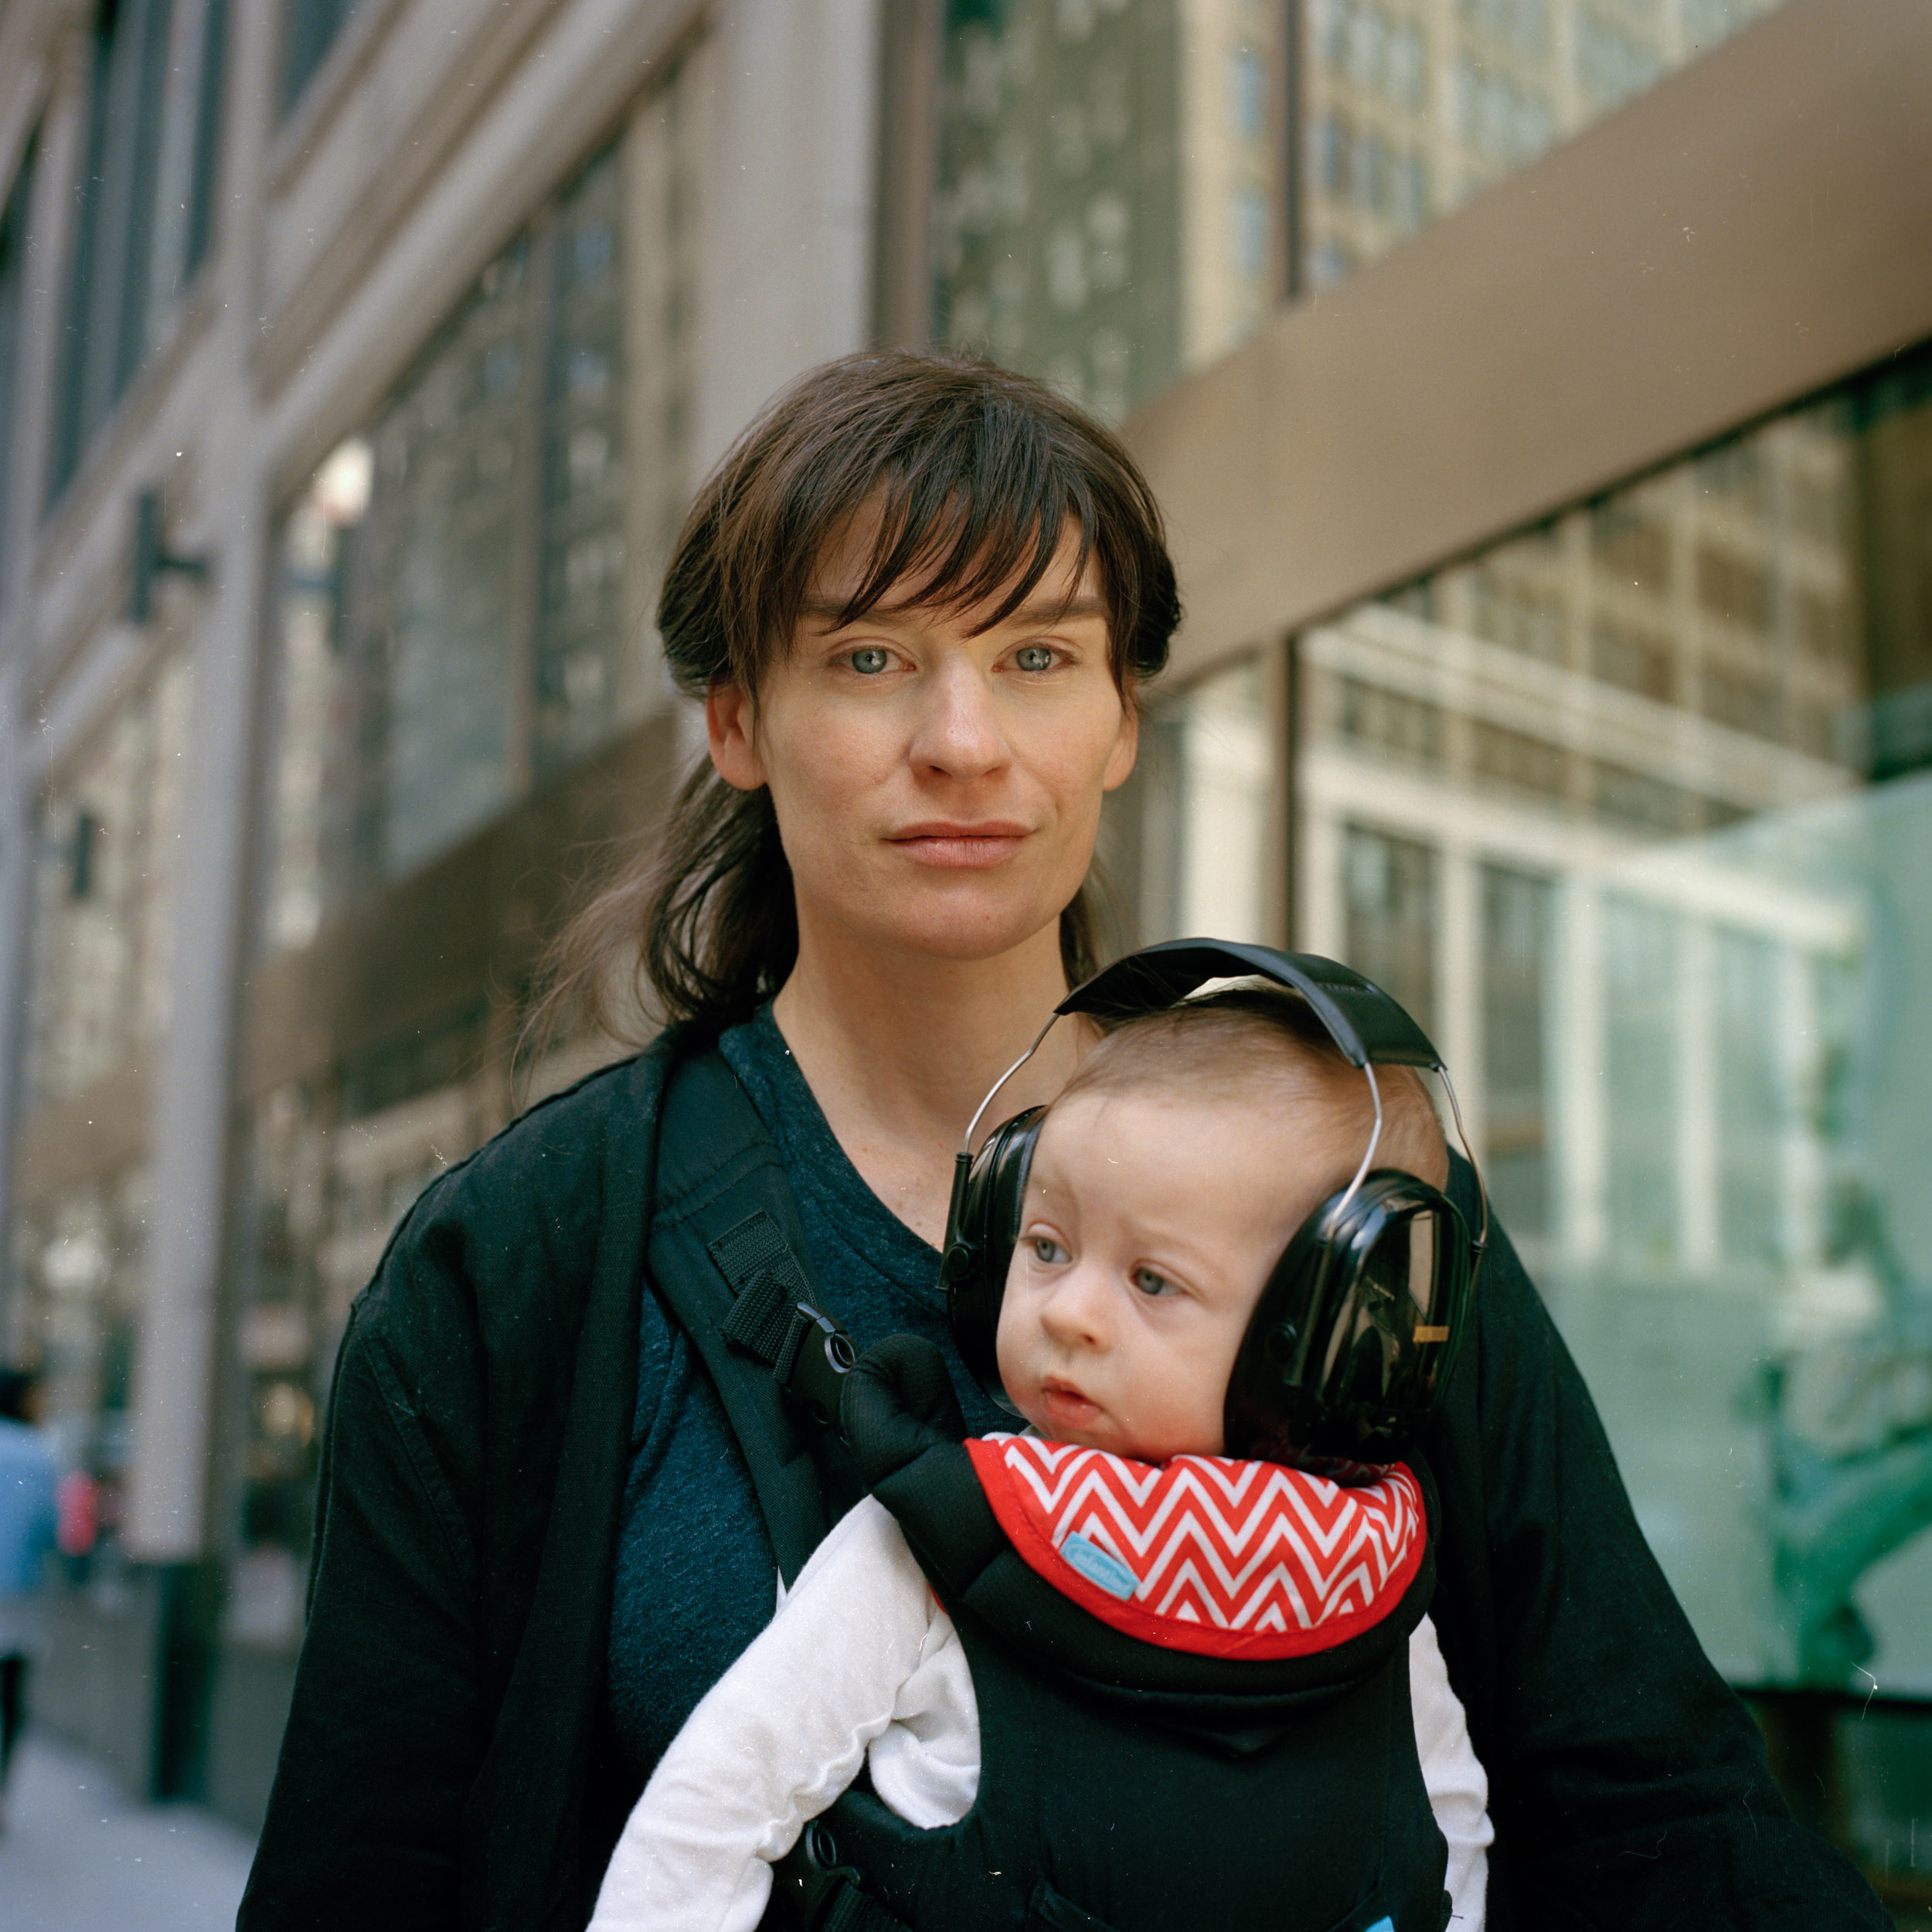 A WOMAN POSES FOR A STREET PORTRAIT WITH HER CHILD STRAPPED TO HER CHEST